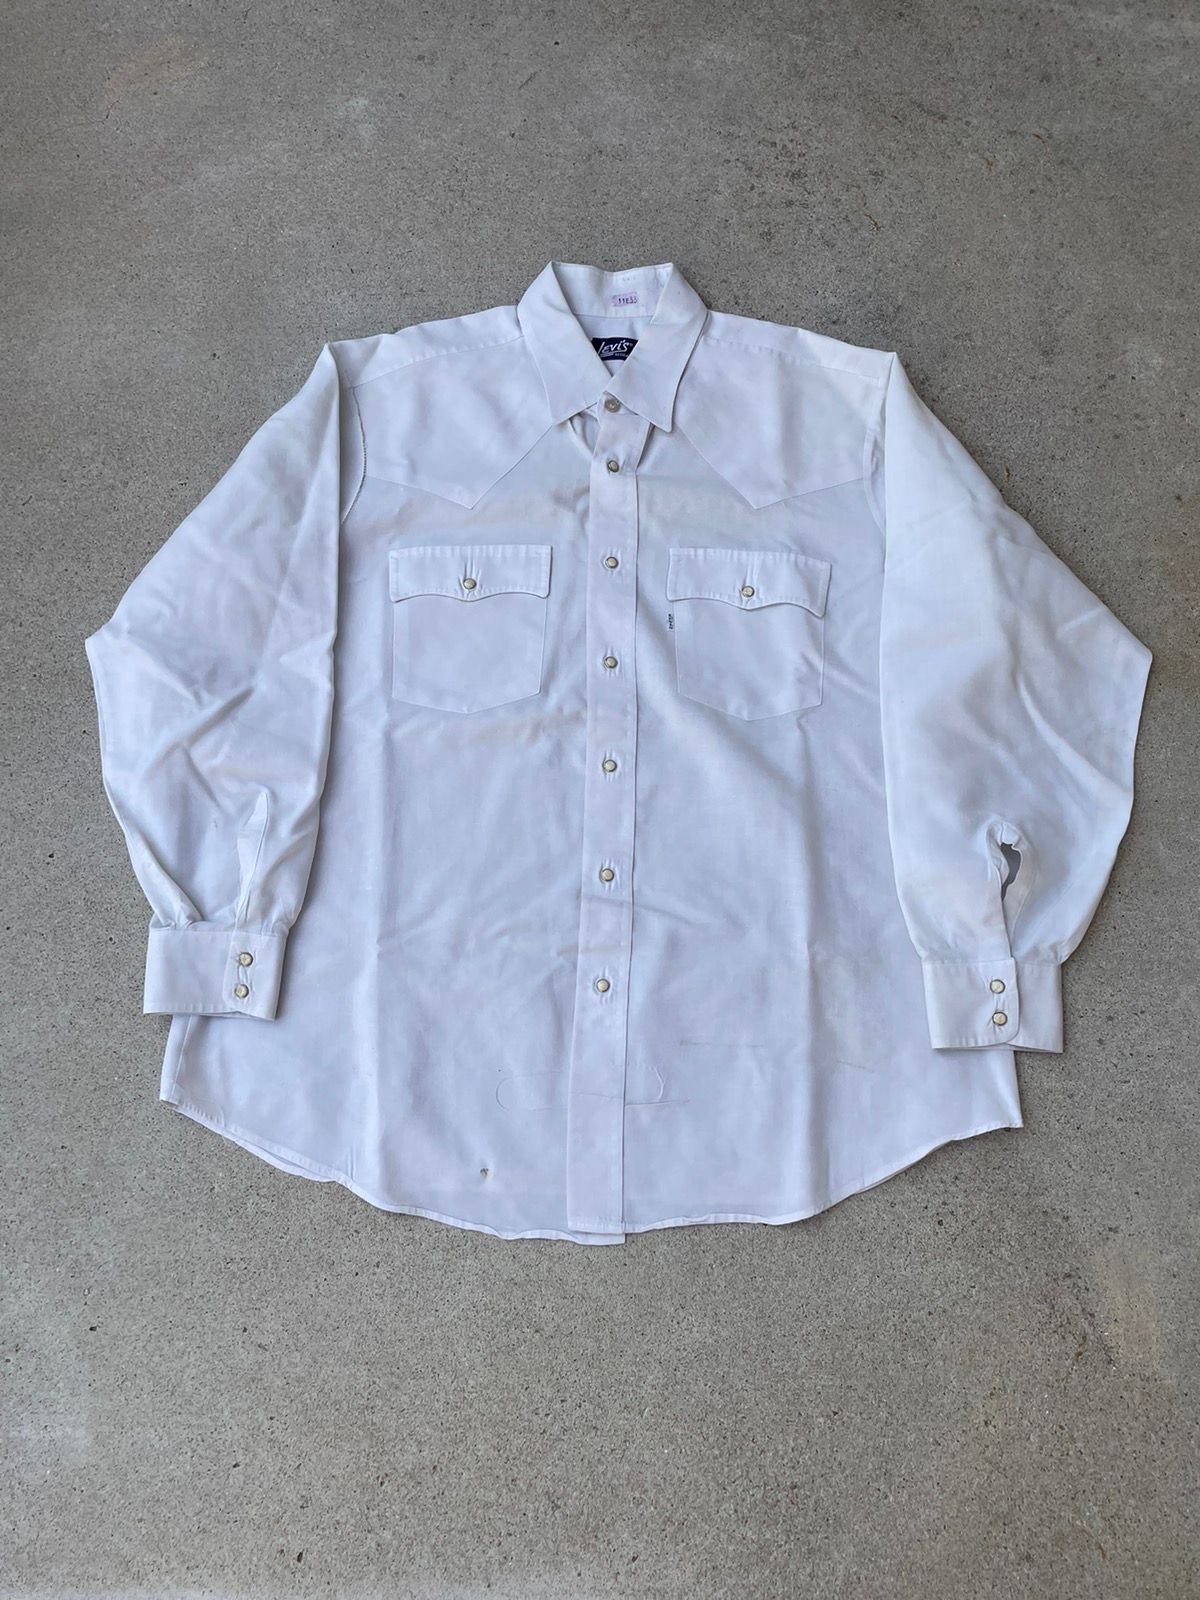 Vintage Vtg 80s Levis White Tab Western Pearl Snap Buttoned Shirt XL Size US XL / EU 56 / 4 - 1 Preview